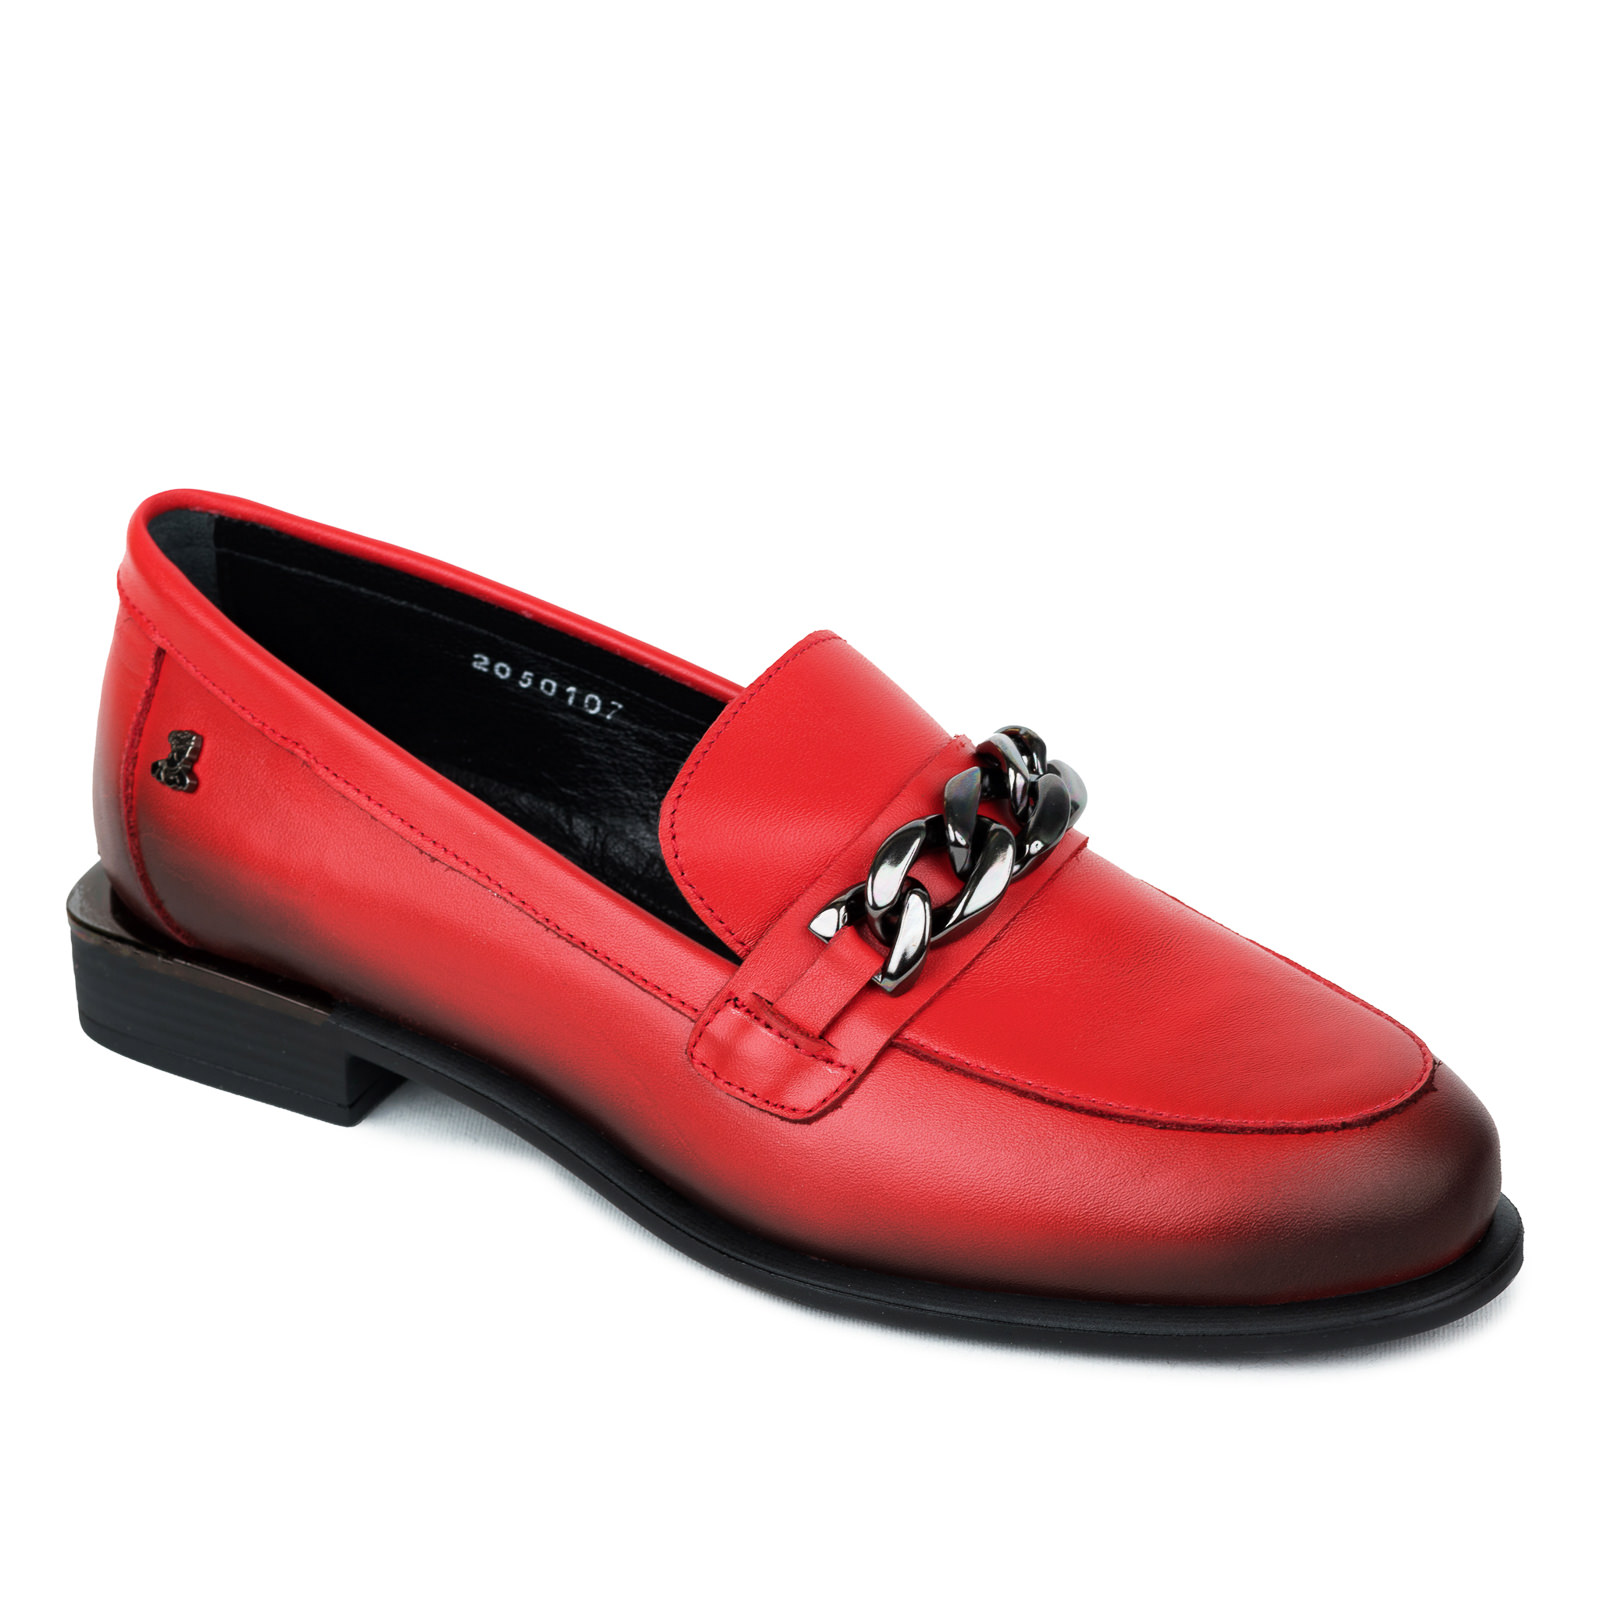 Leather shoes & flats B272 - RED